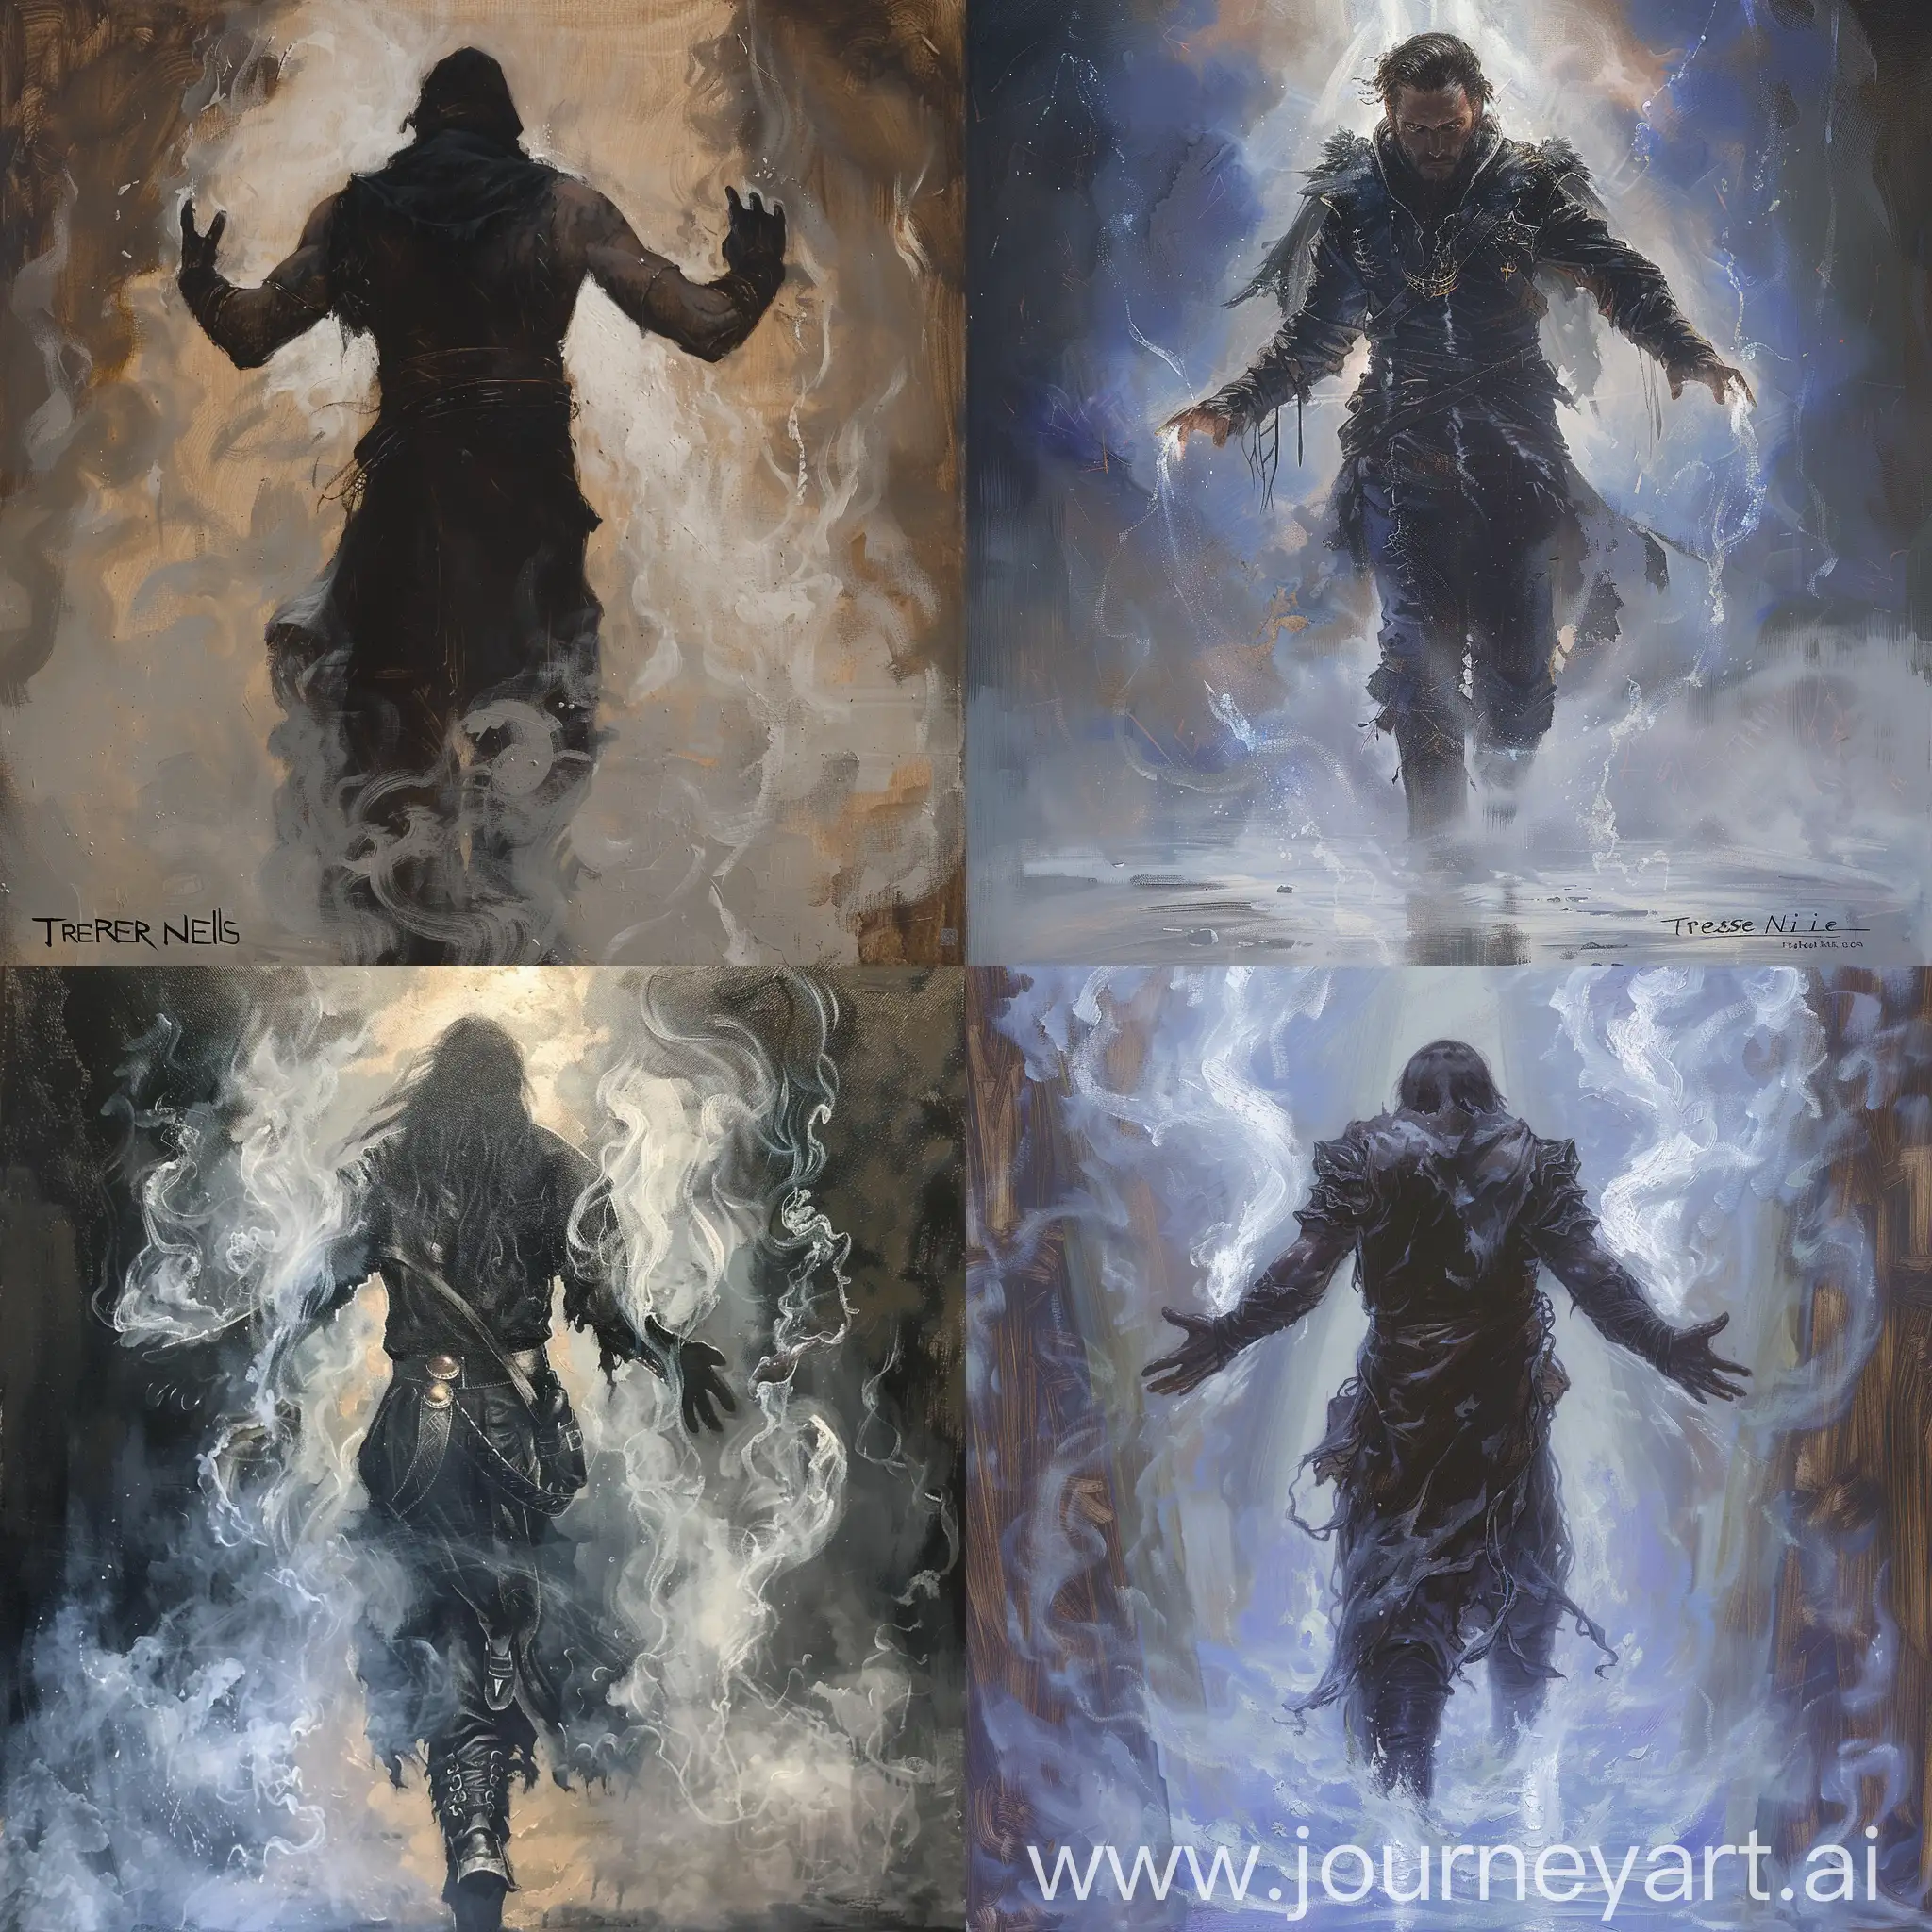 battle mage walking through steam with his hands raised to either side of him.
In the art style of Terese Nielsen oil painting.